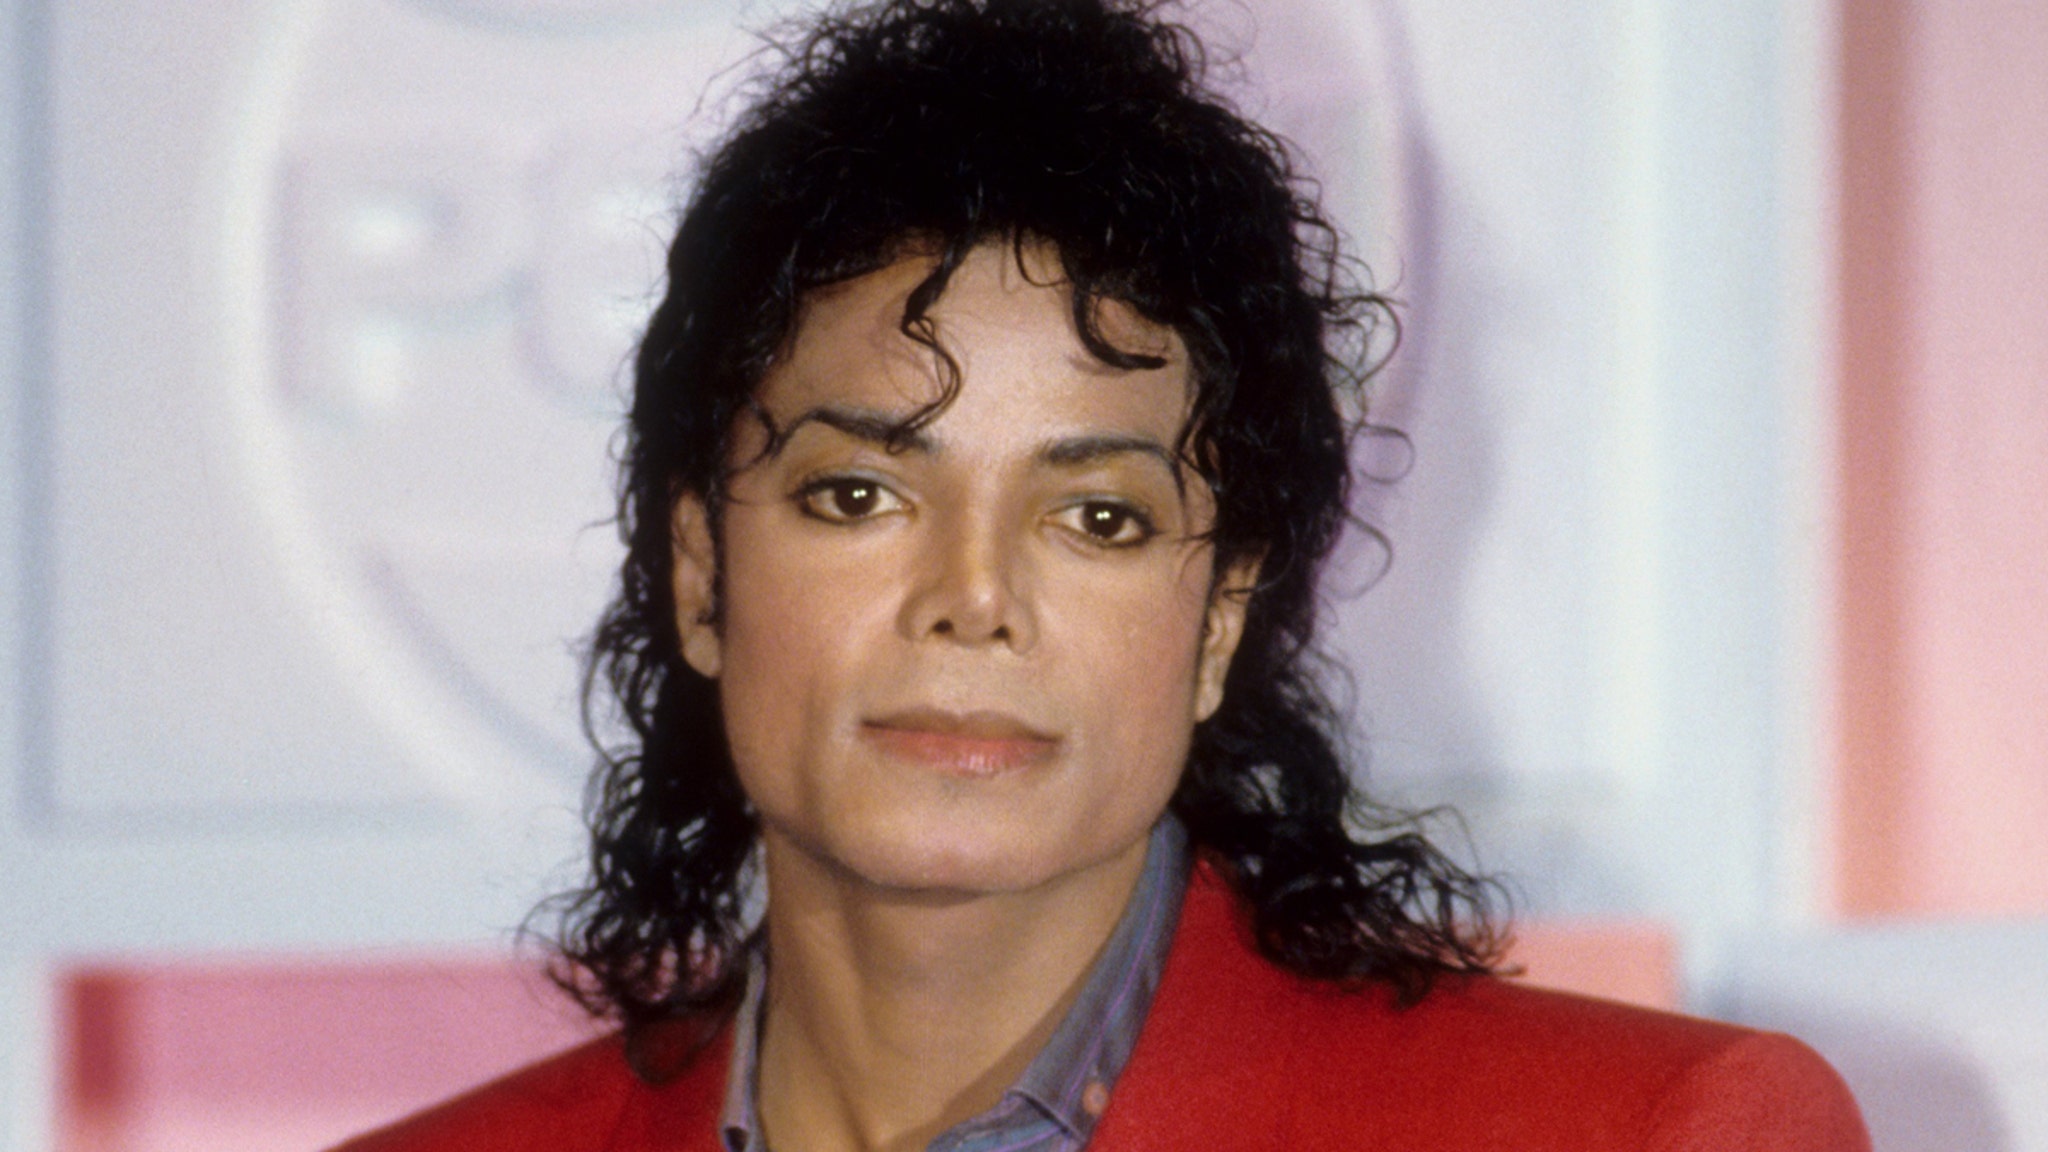 Three Michael Jackson Songs Removed From Streaming Amid Voting Lawsuit